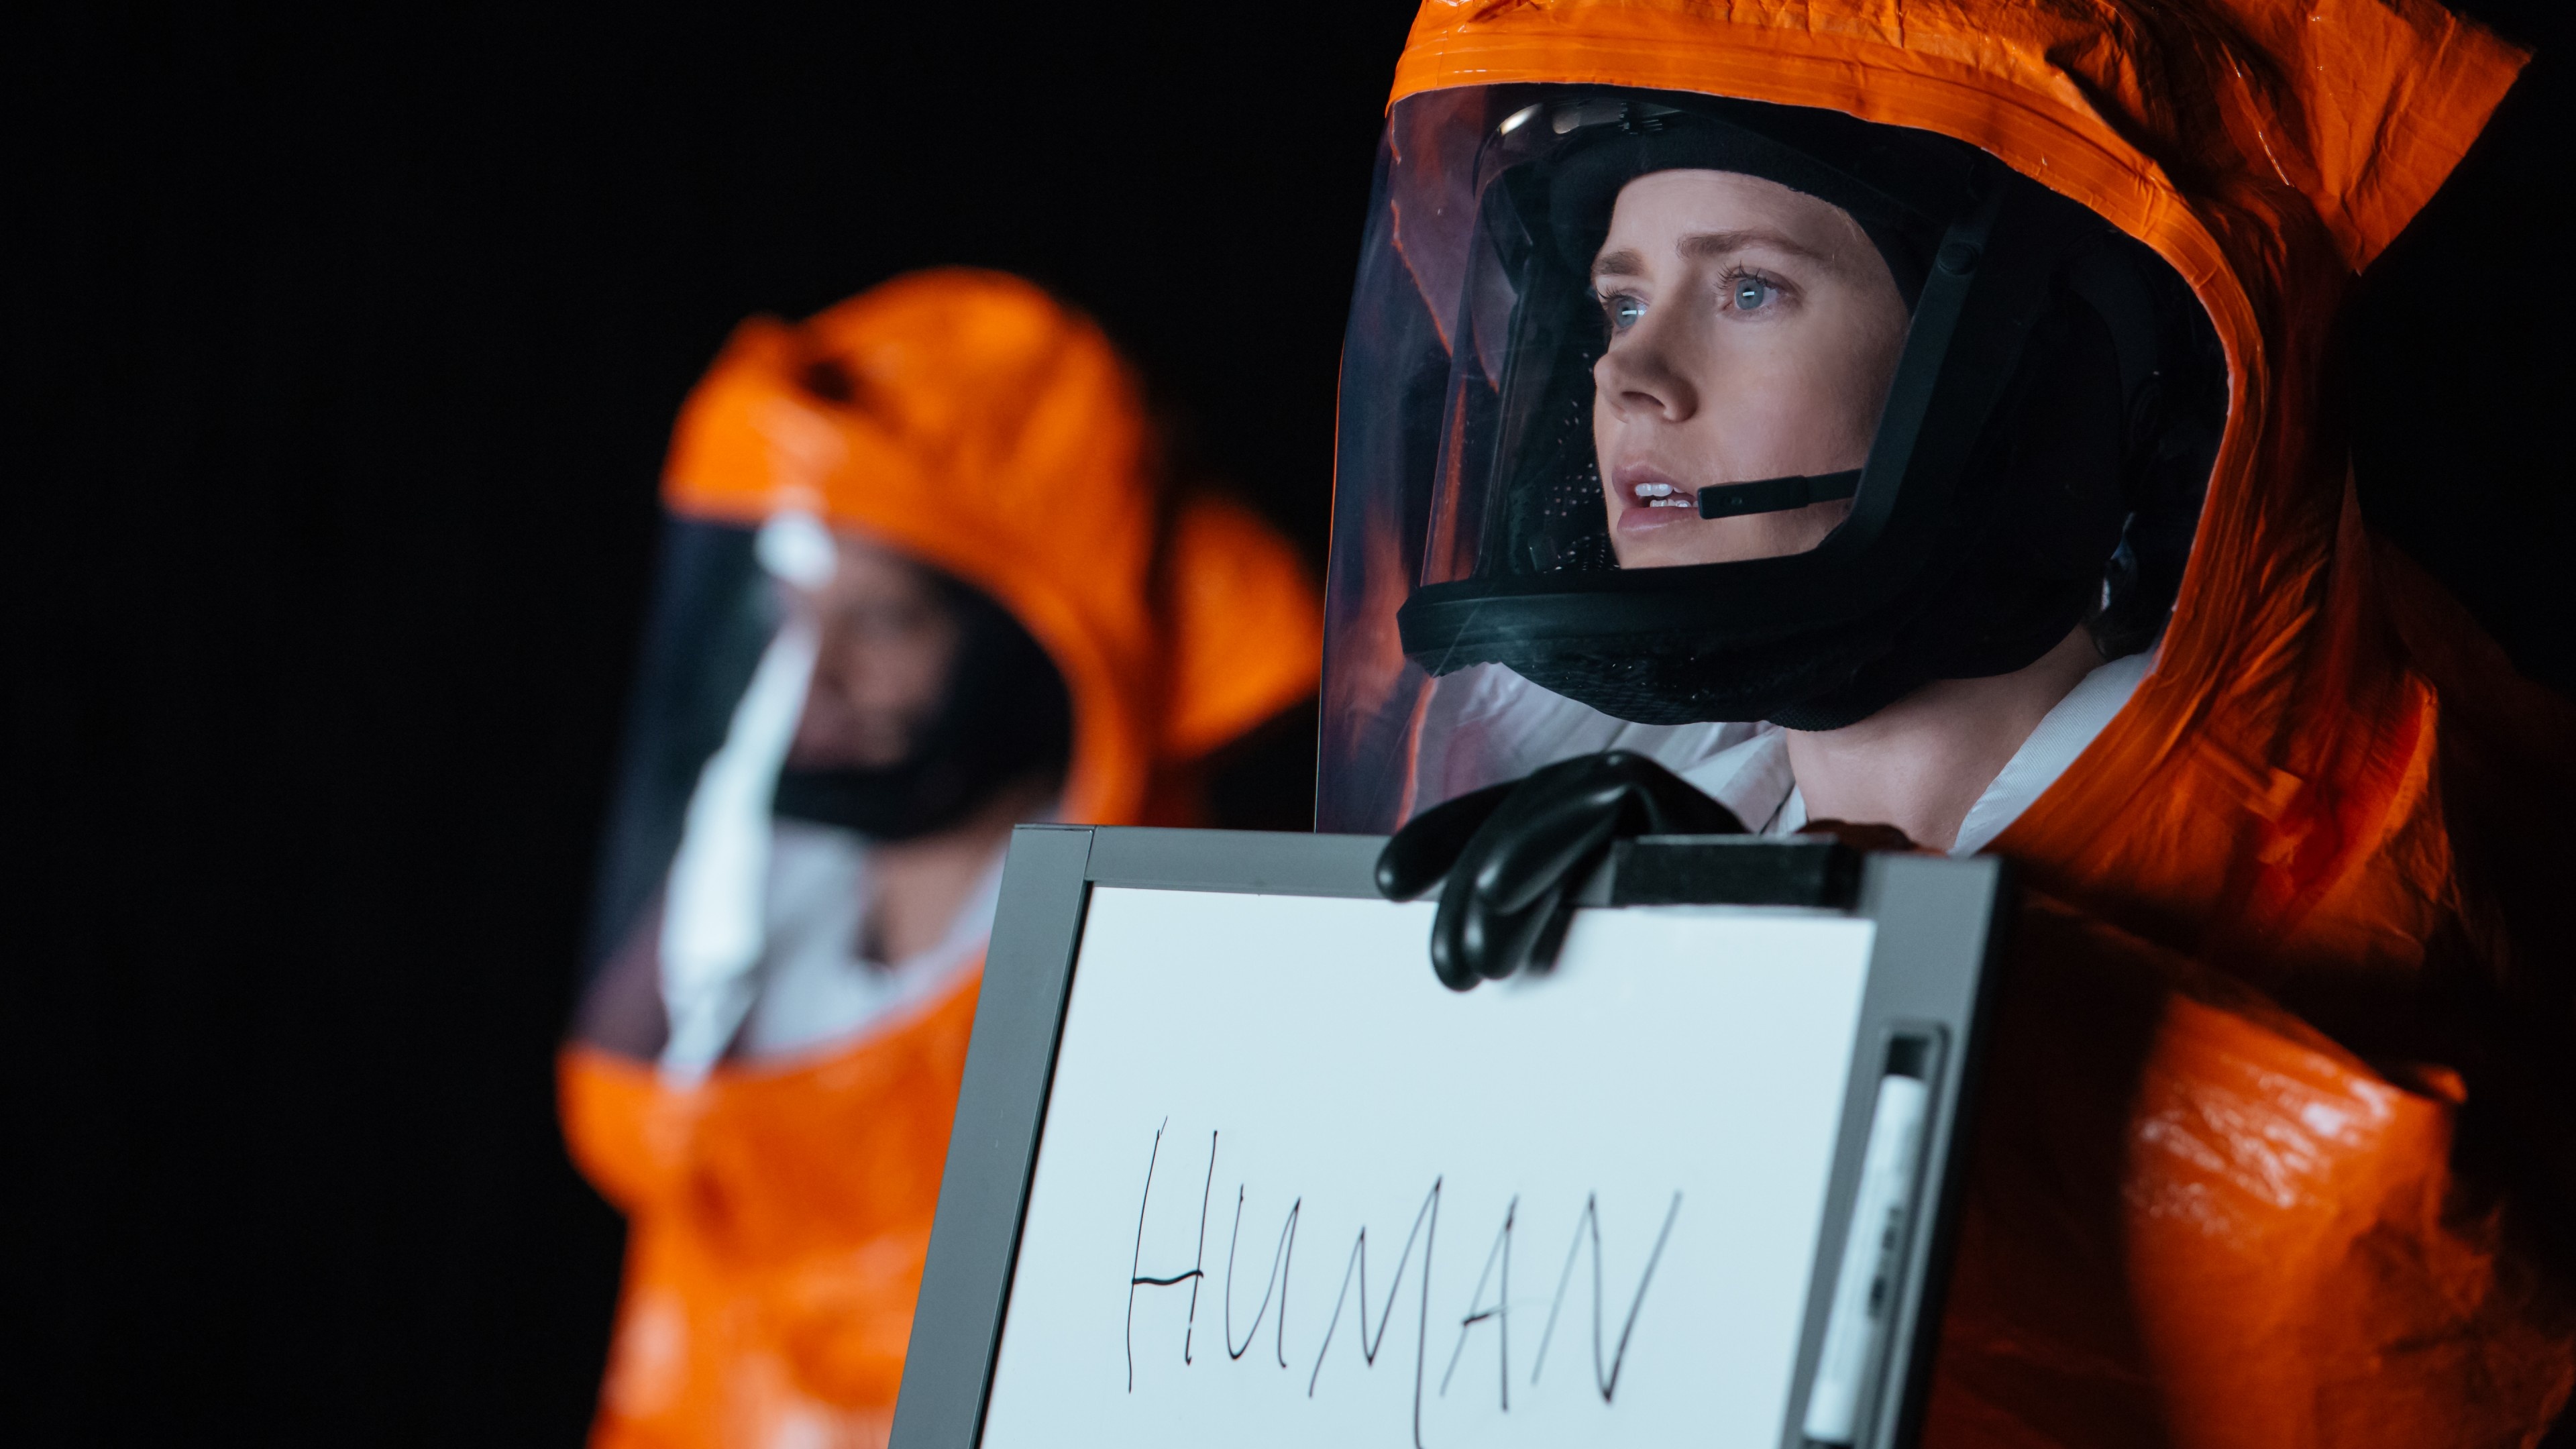 Arrival (Movie): Amy Adams as Louise Banks, Sci-fi. 3840x2160 4K Background.